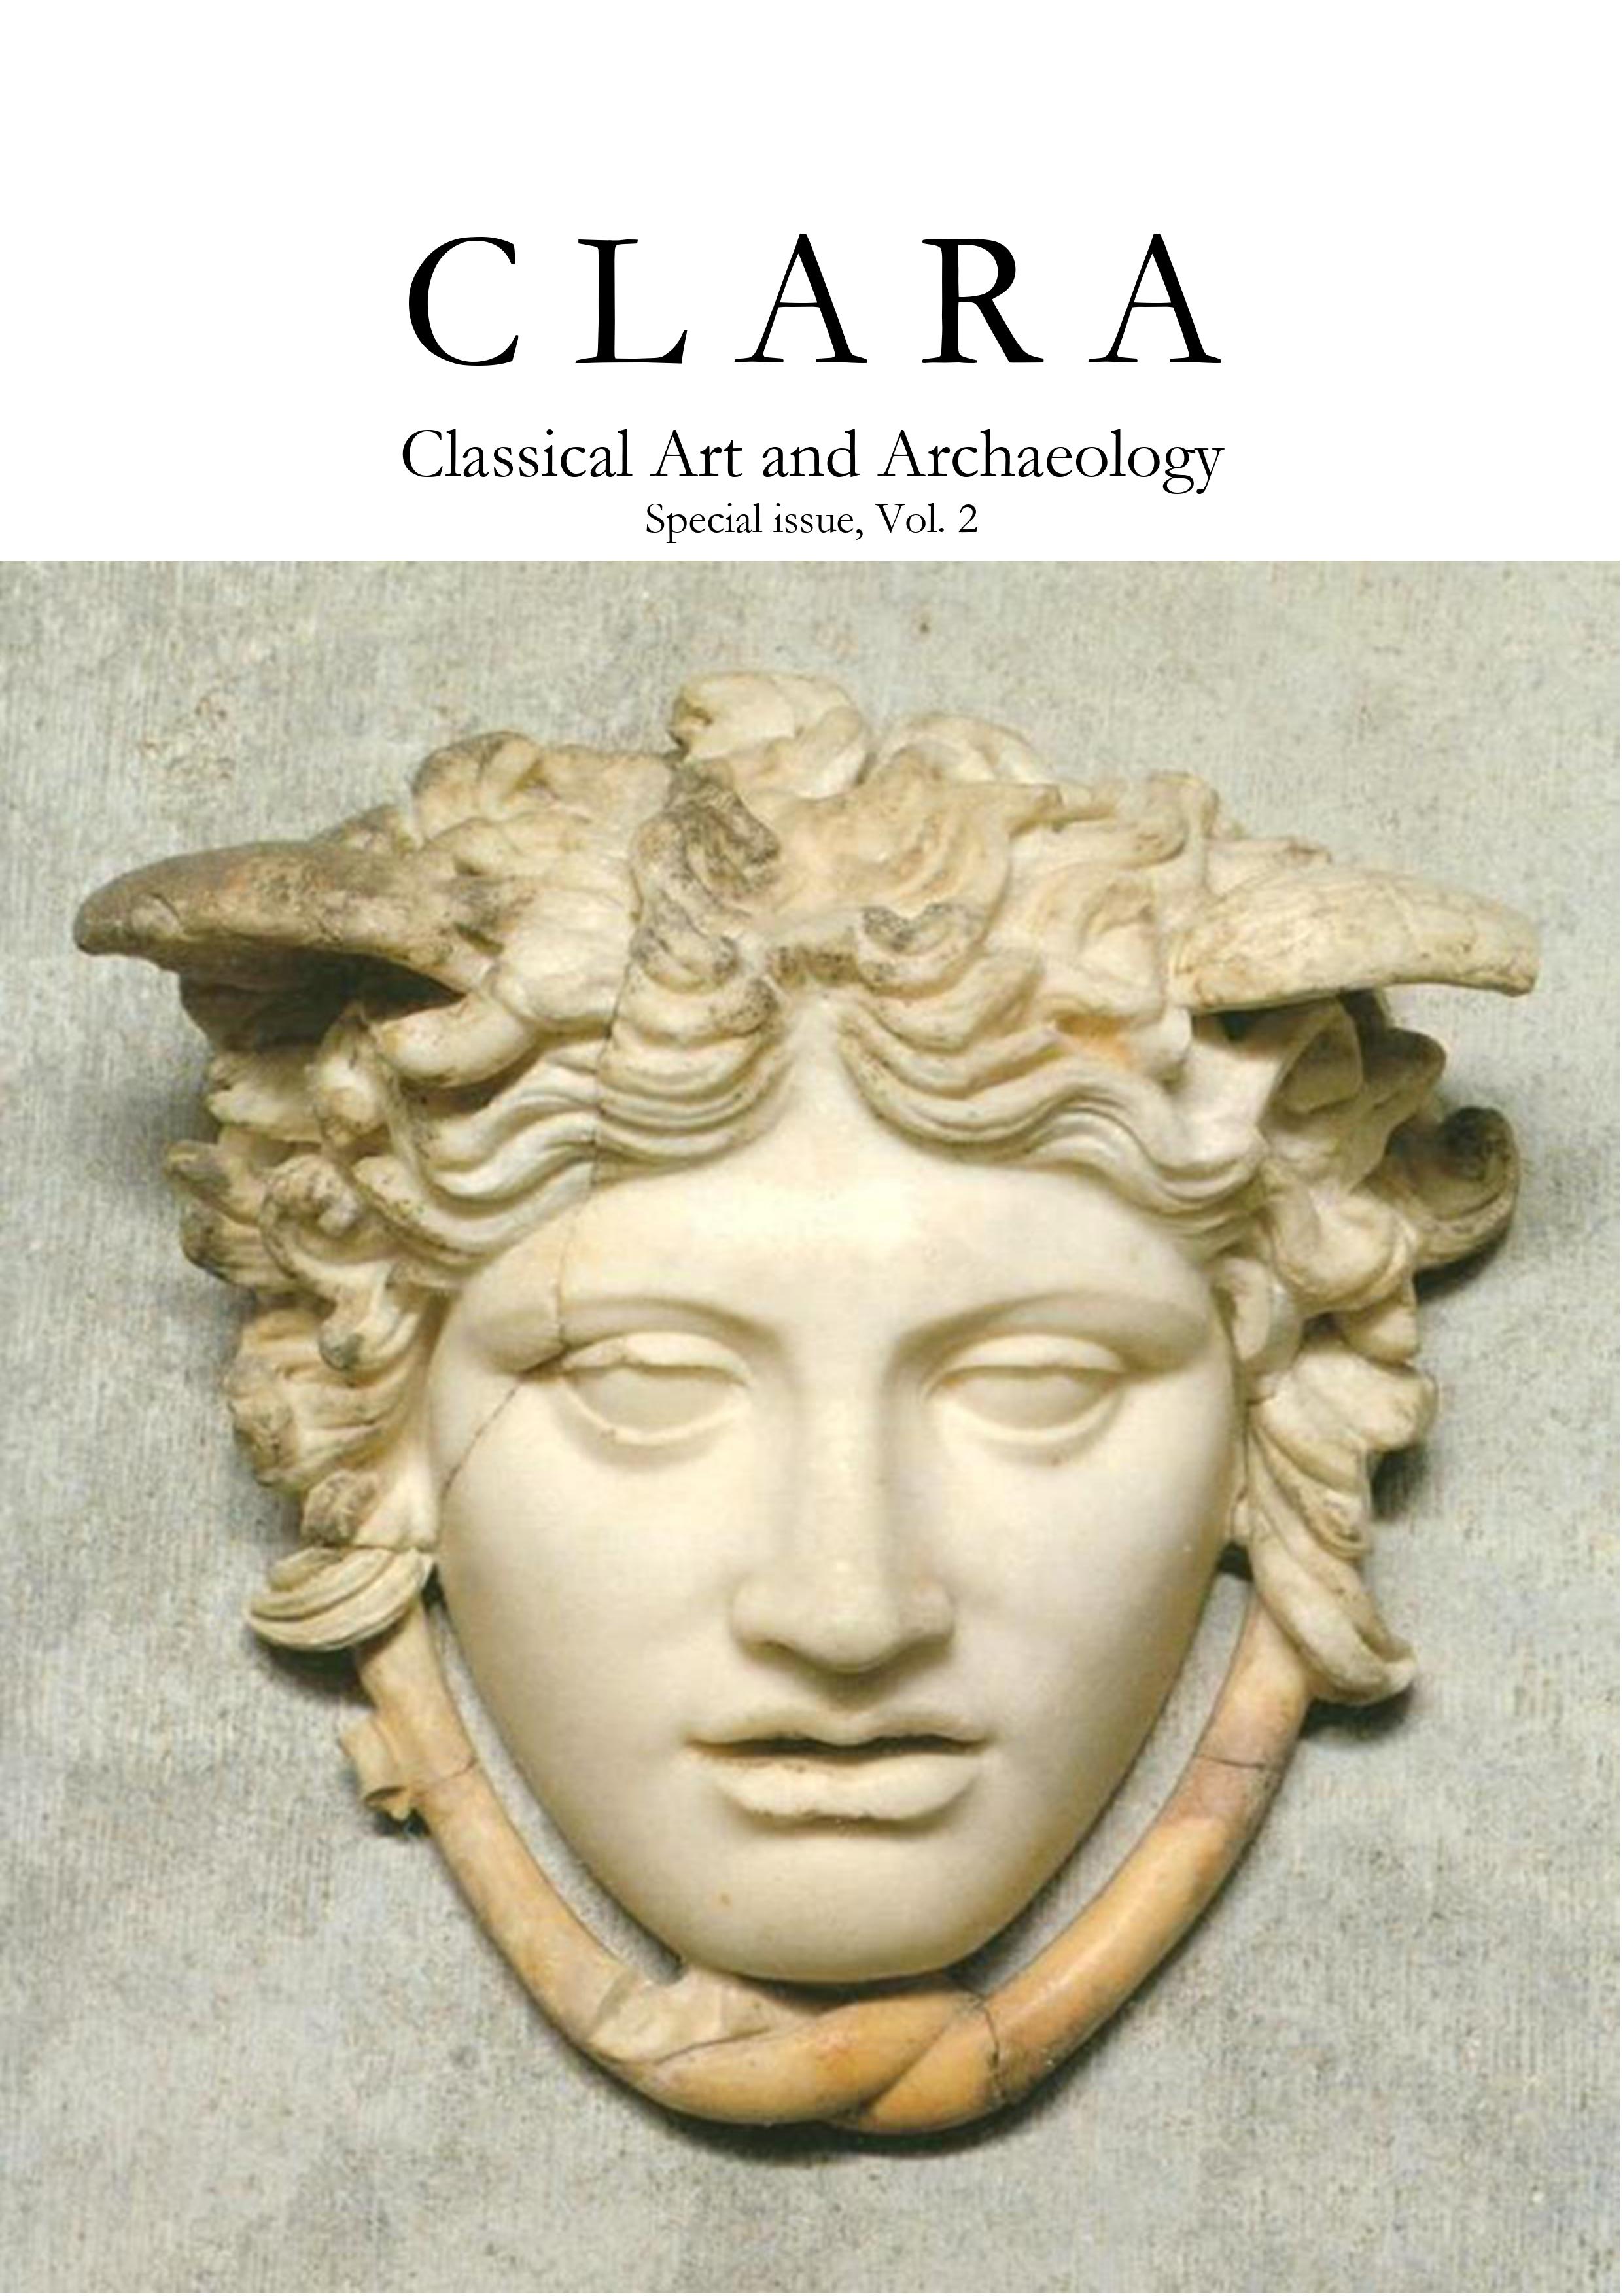 					View Vol. 8 (2021):   CLARA Special issue no 2: The Classical in Contemporary Art and Visual Culture
				